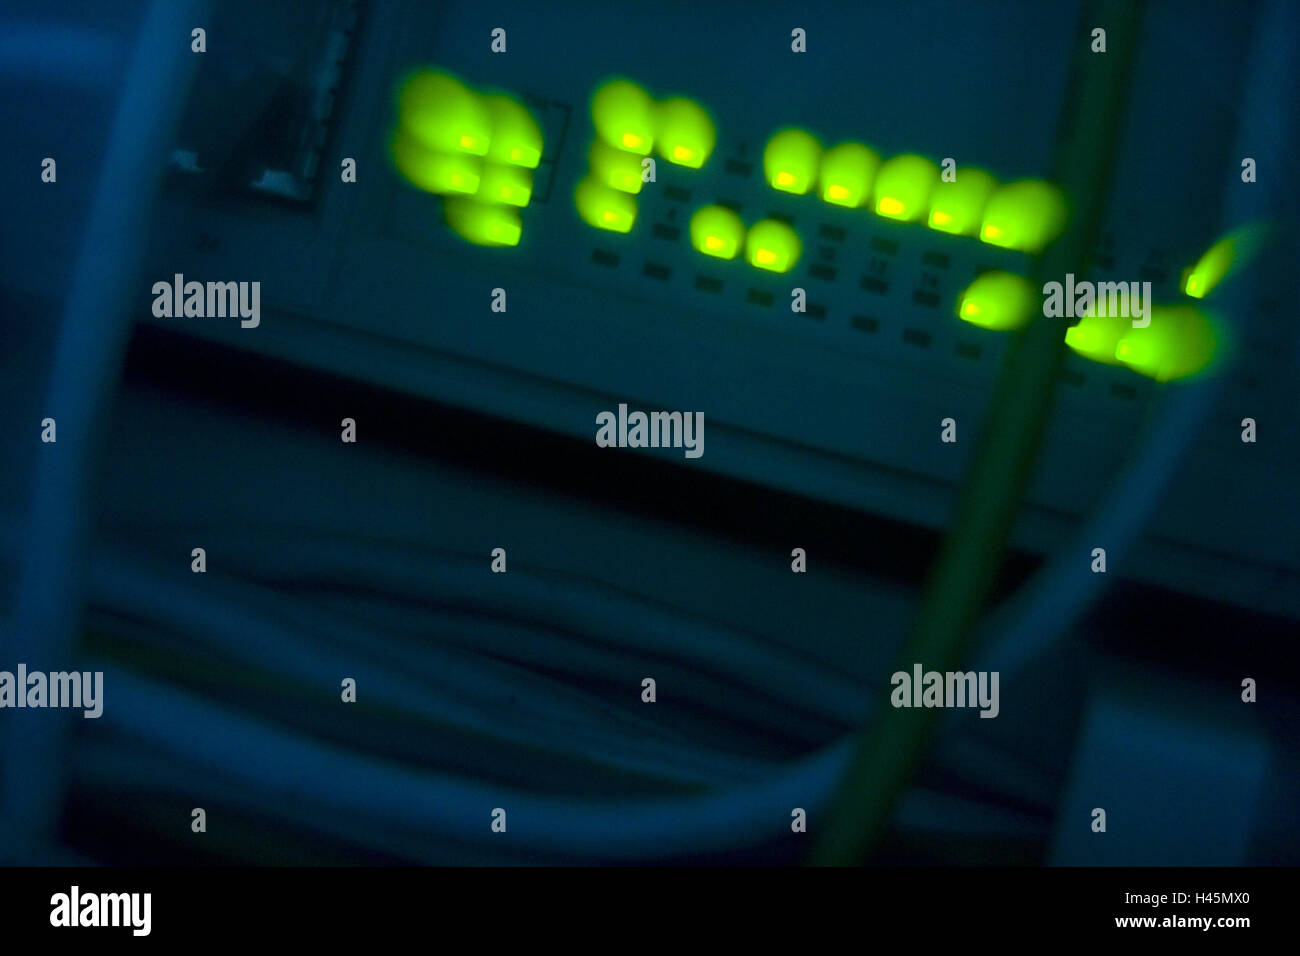 Computer, back, light-emitting diodes, blur, server, diodes, headlights, light, green, neon light, neon green, brightly, cable, interlinking, EDP, data processing, computer, network, Stock Photo